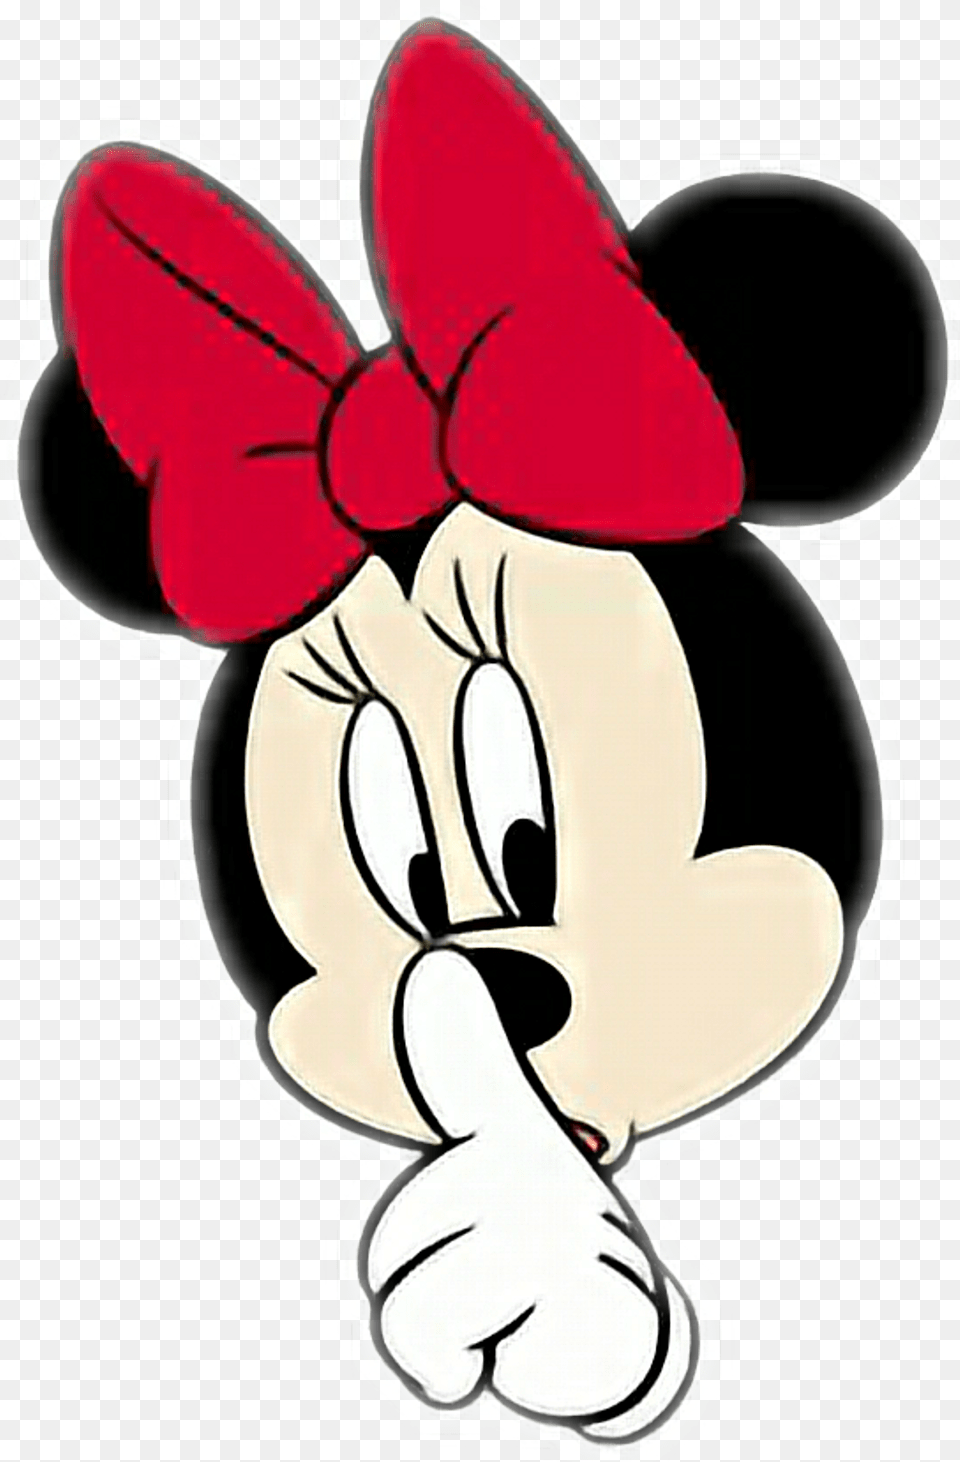 Minnie Mouse Shh Download Minnie Mouse Shhh, Cutlery, Spoon, Cartoon, Baby Free Png